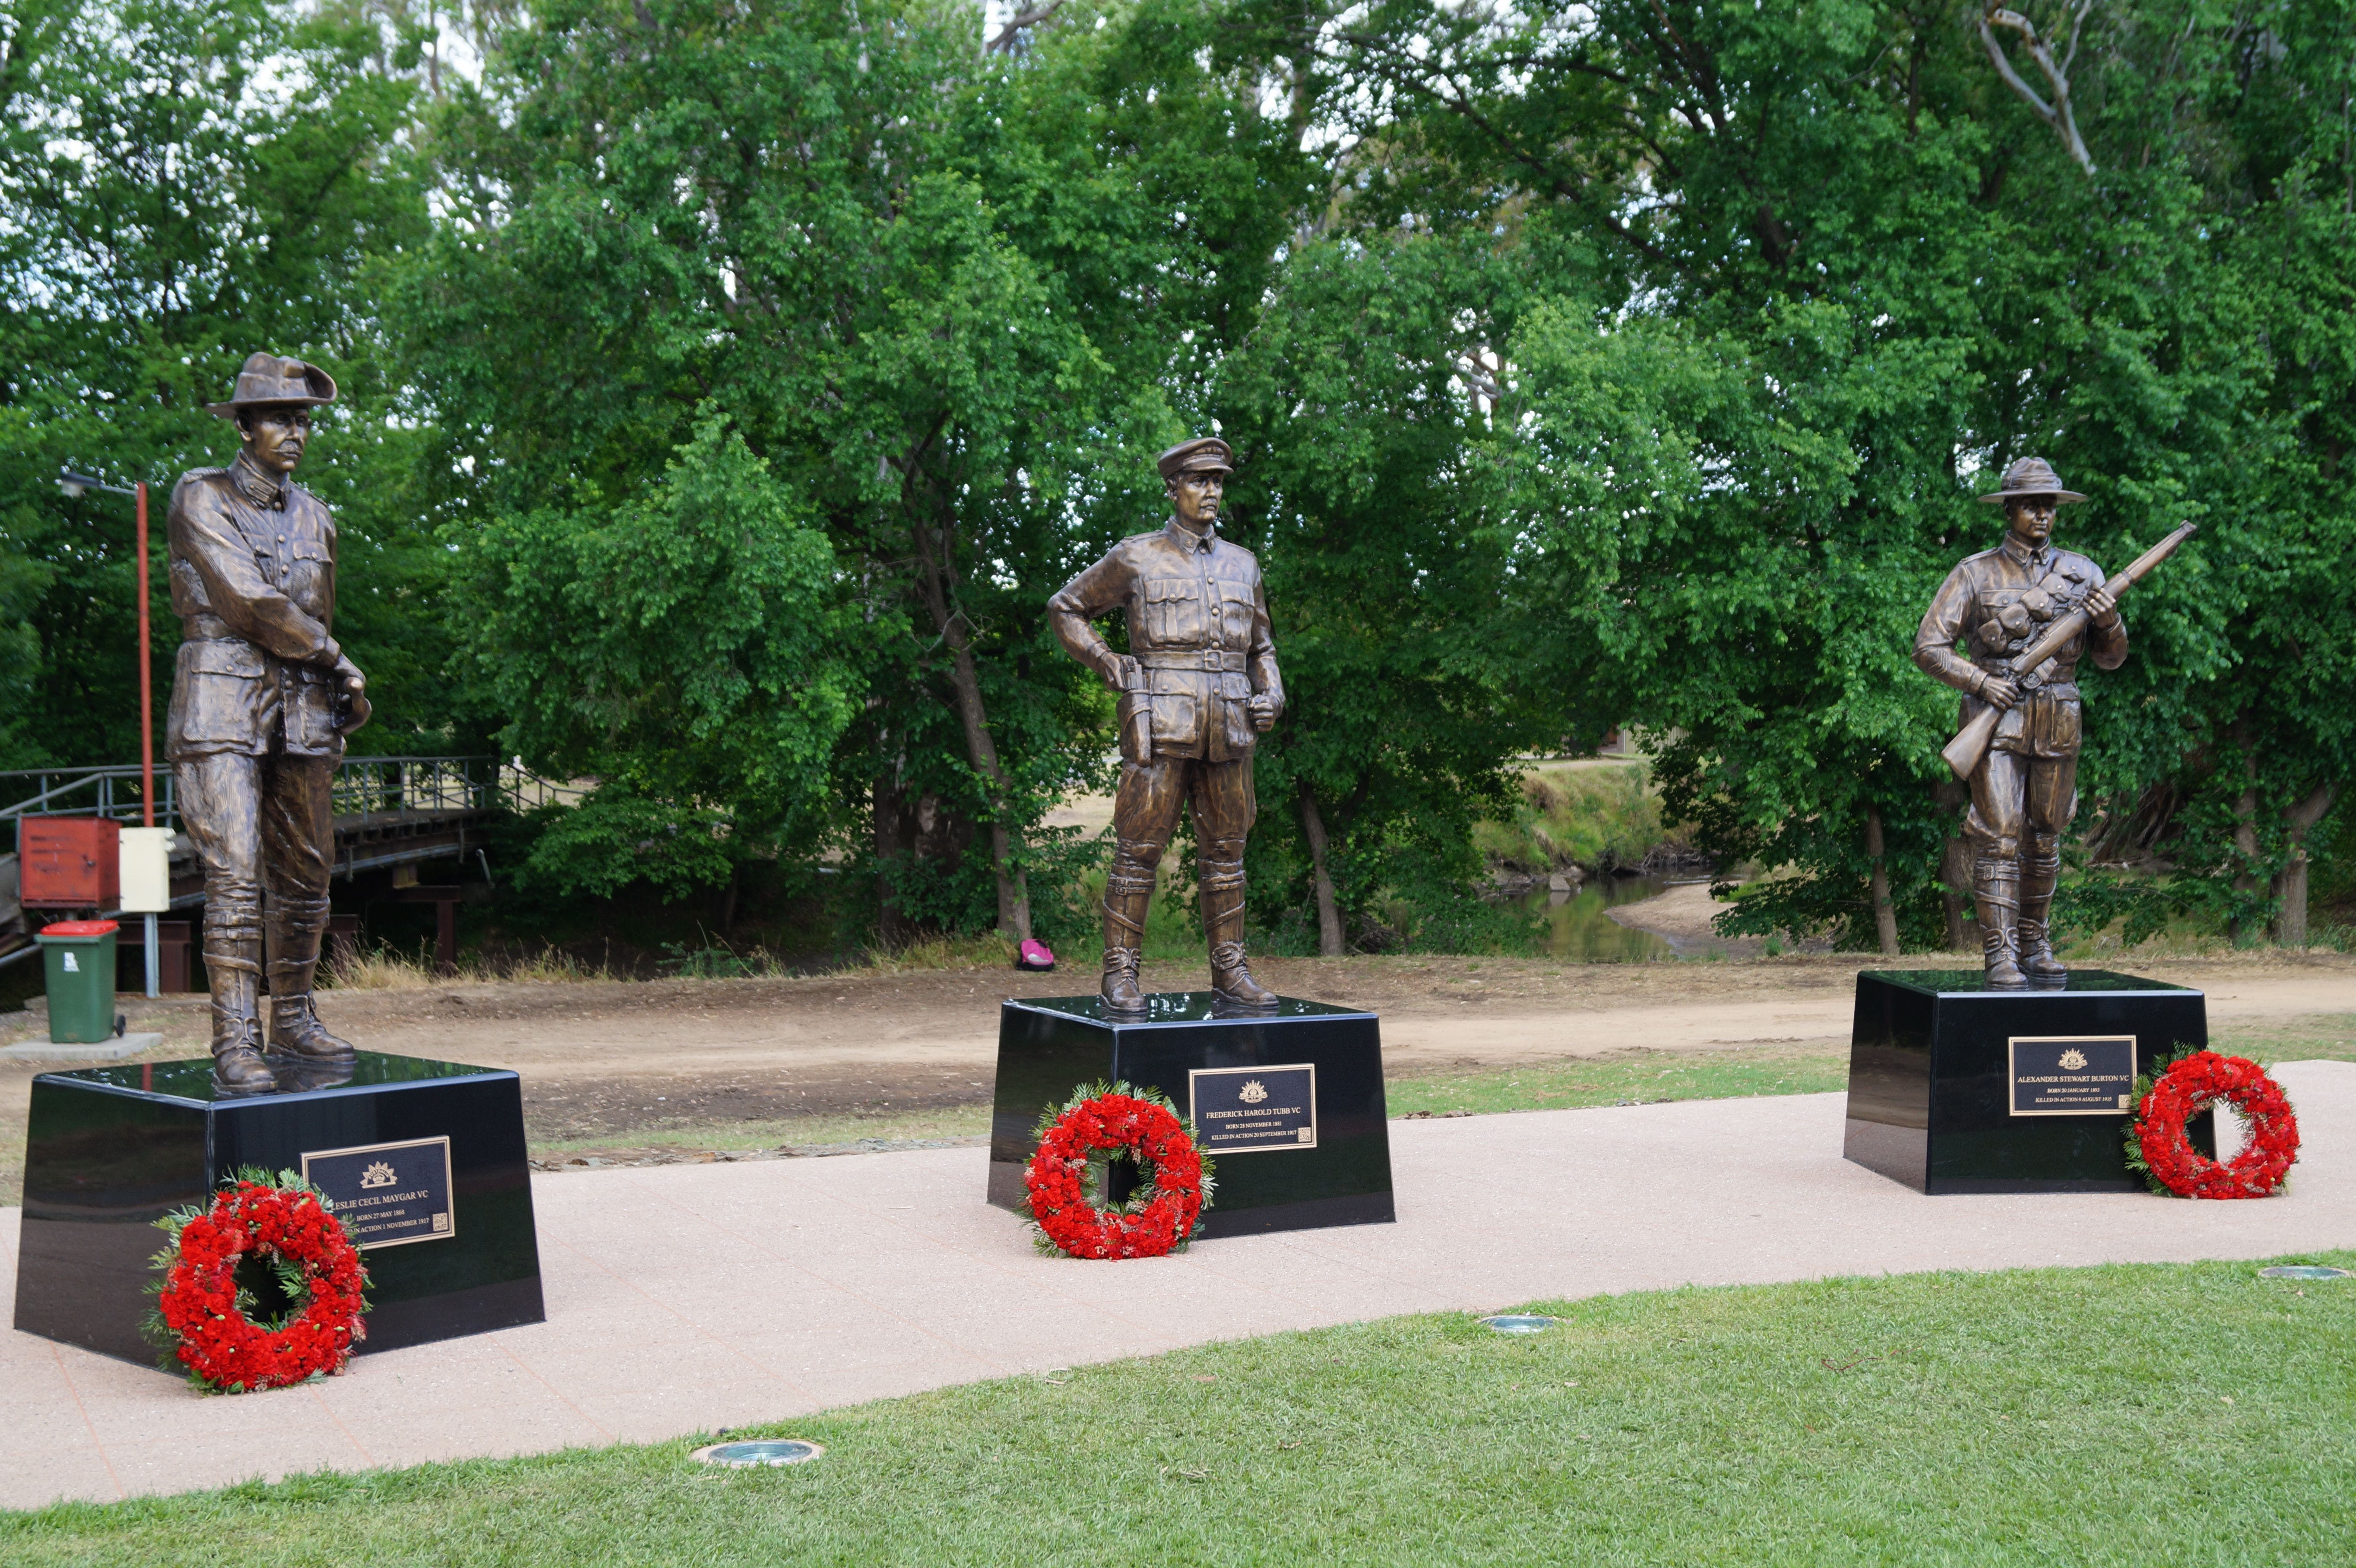 VC Memorial Park - Honouring Our Heroes - Accommodation Nelson Bay